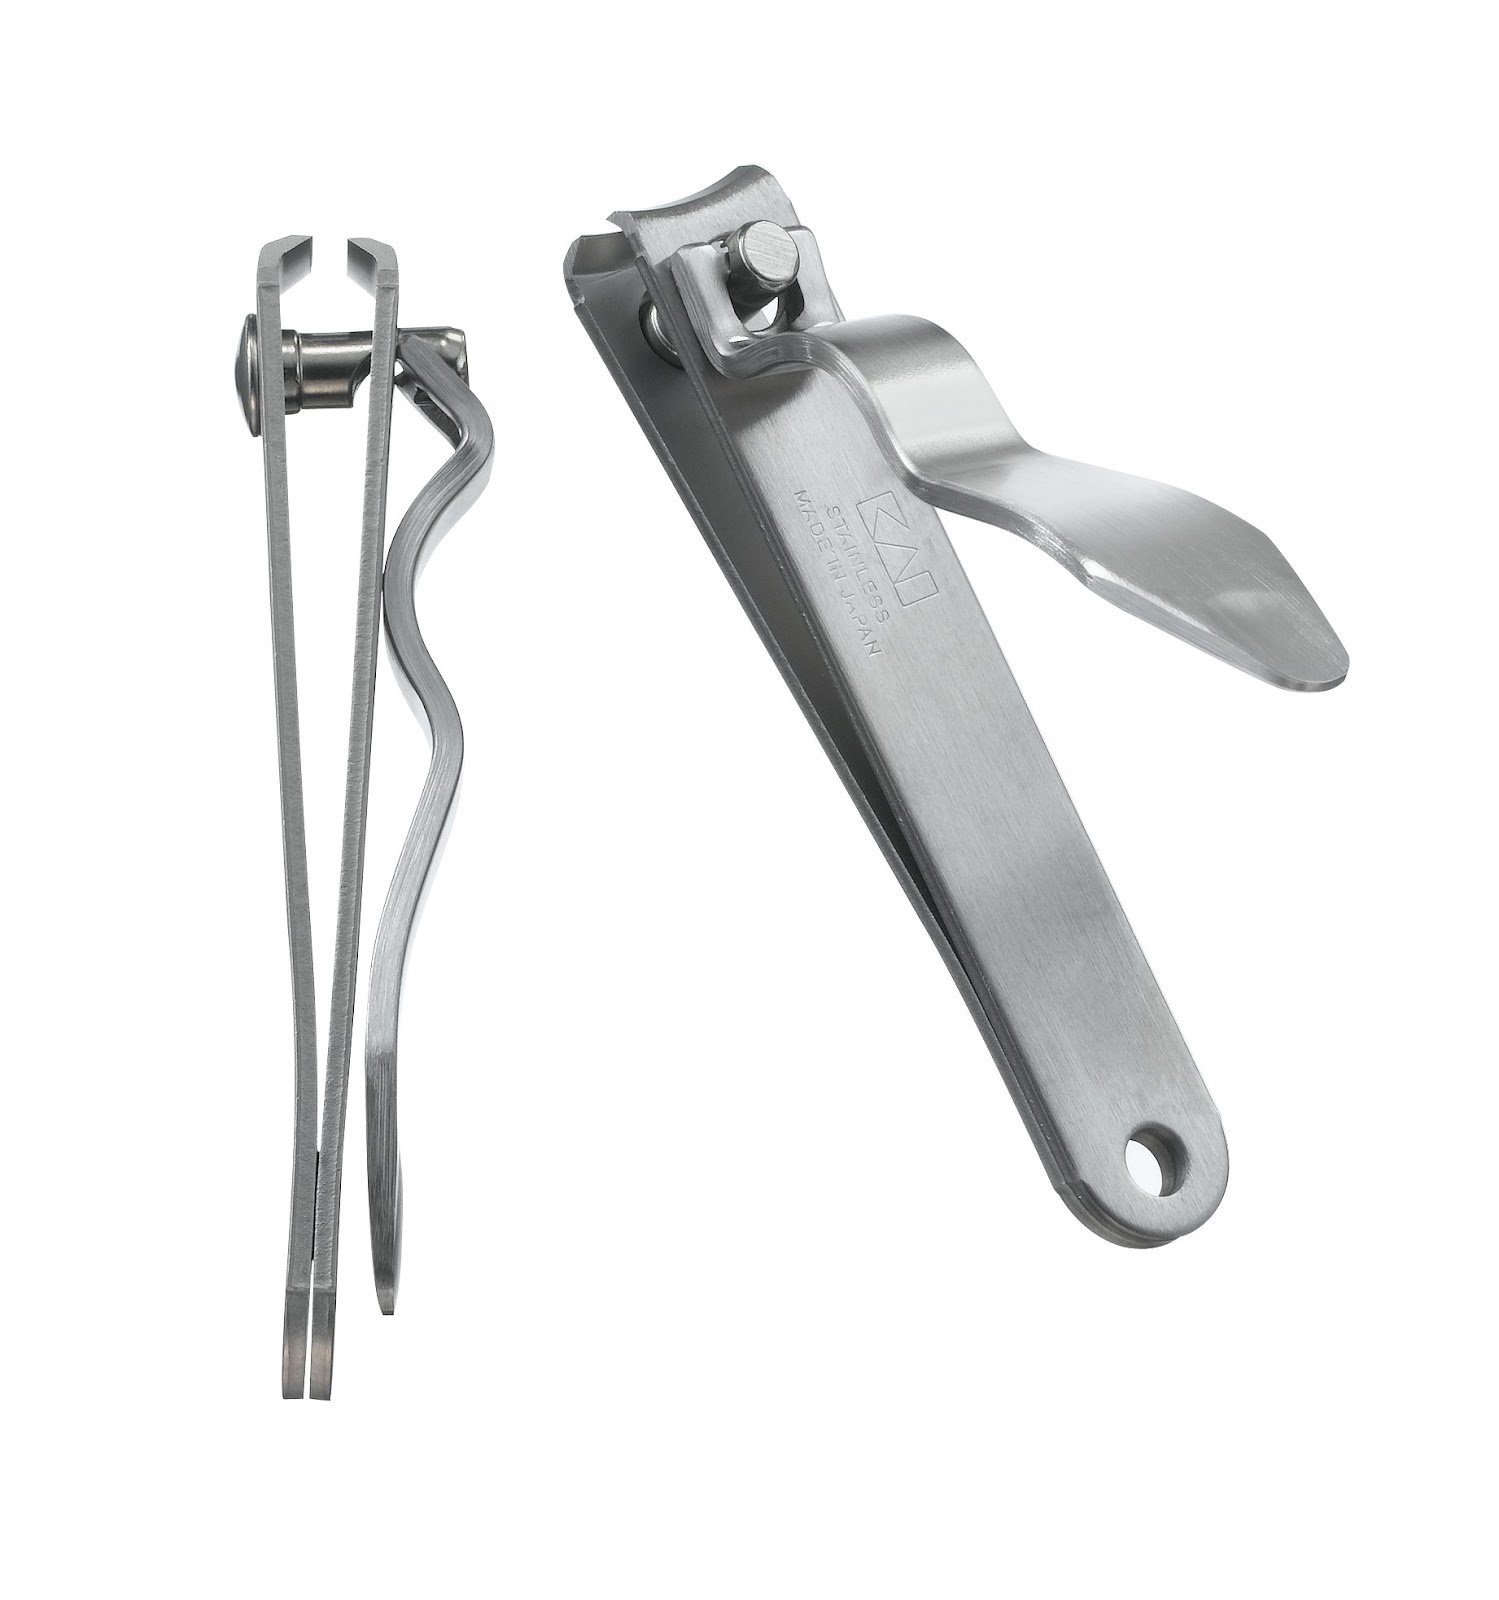 New Wave Nail Clipper -features cutlery-grade stainless steel blades and